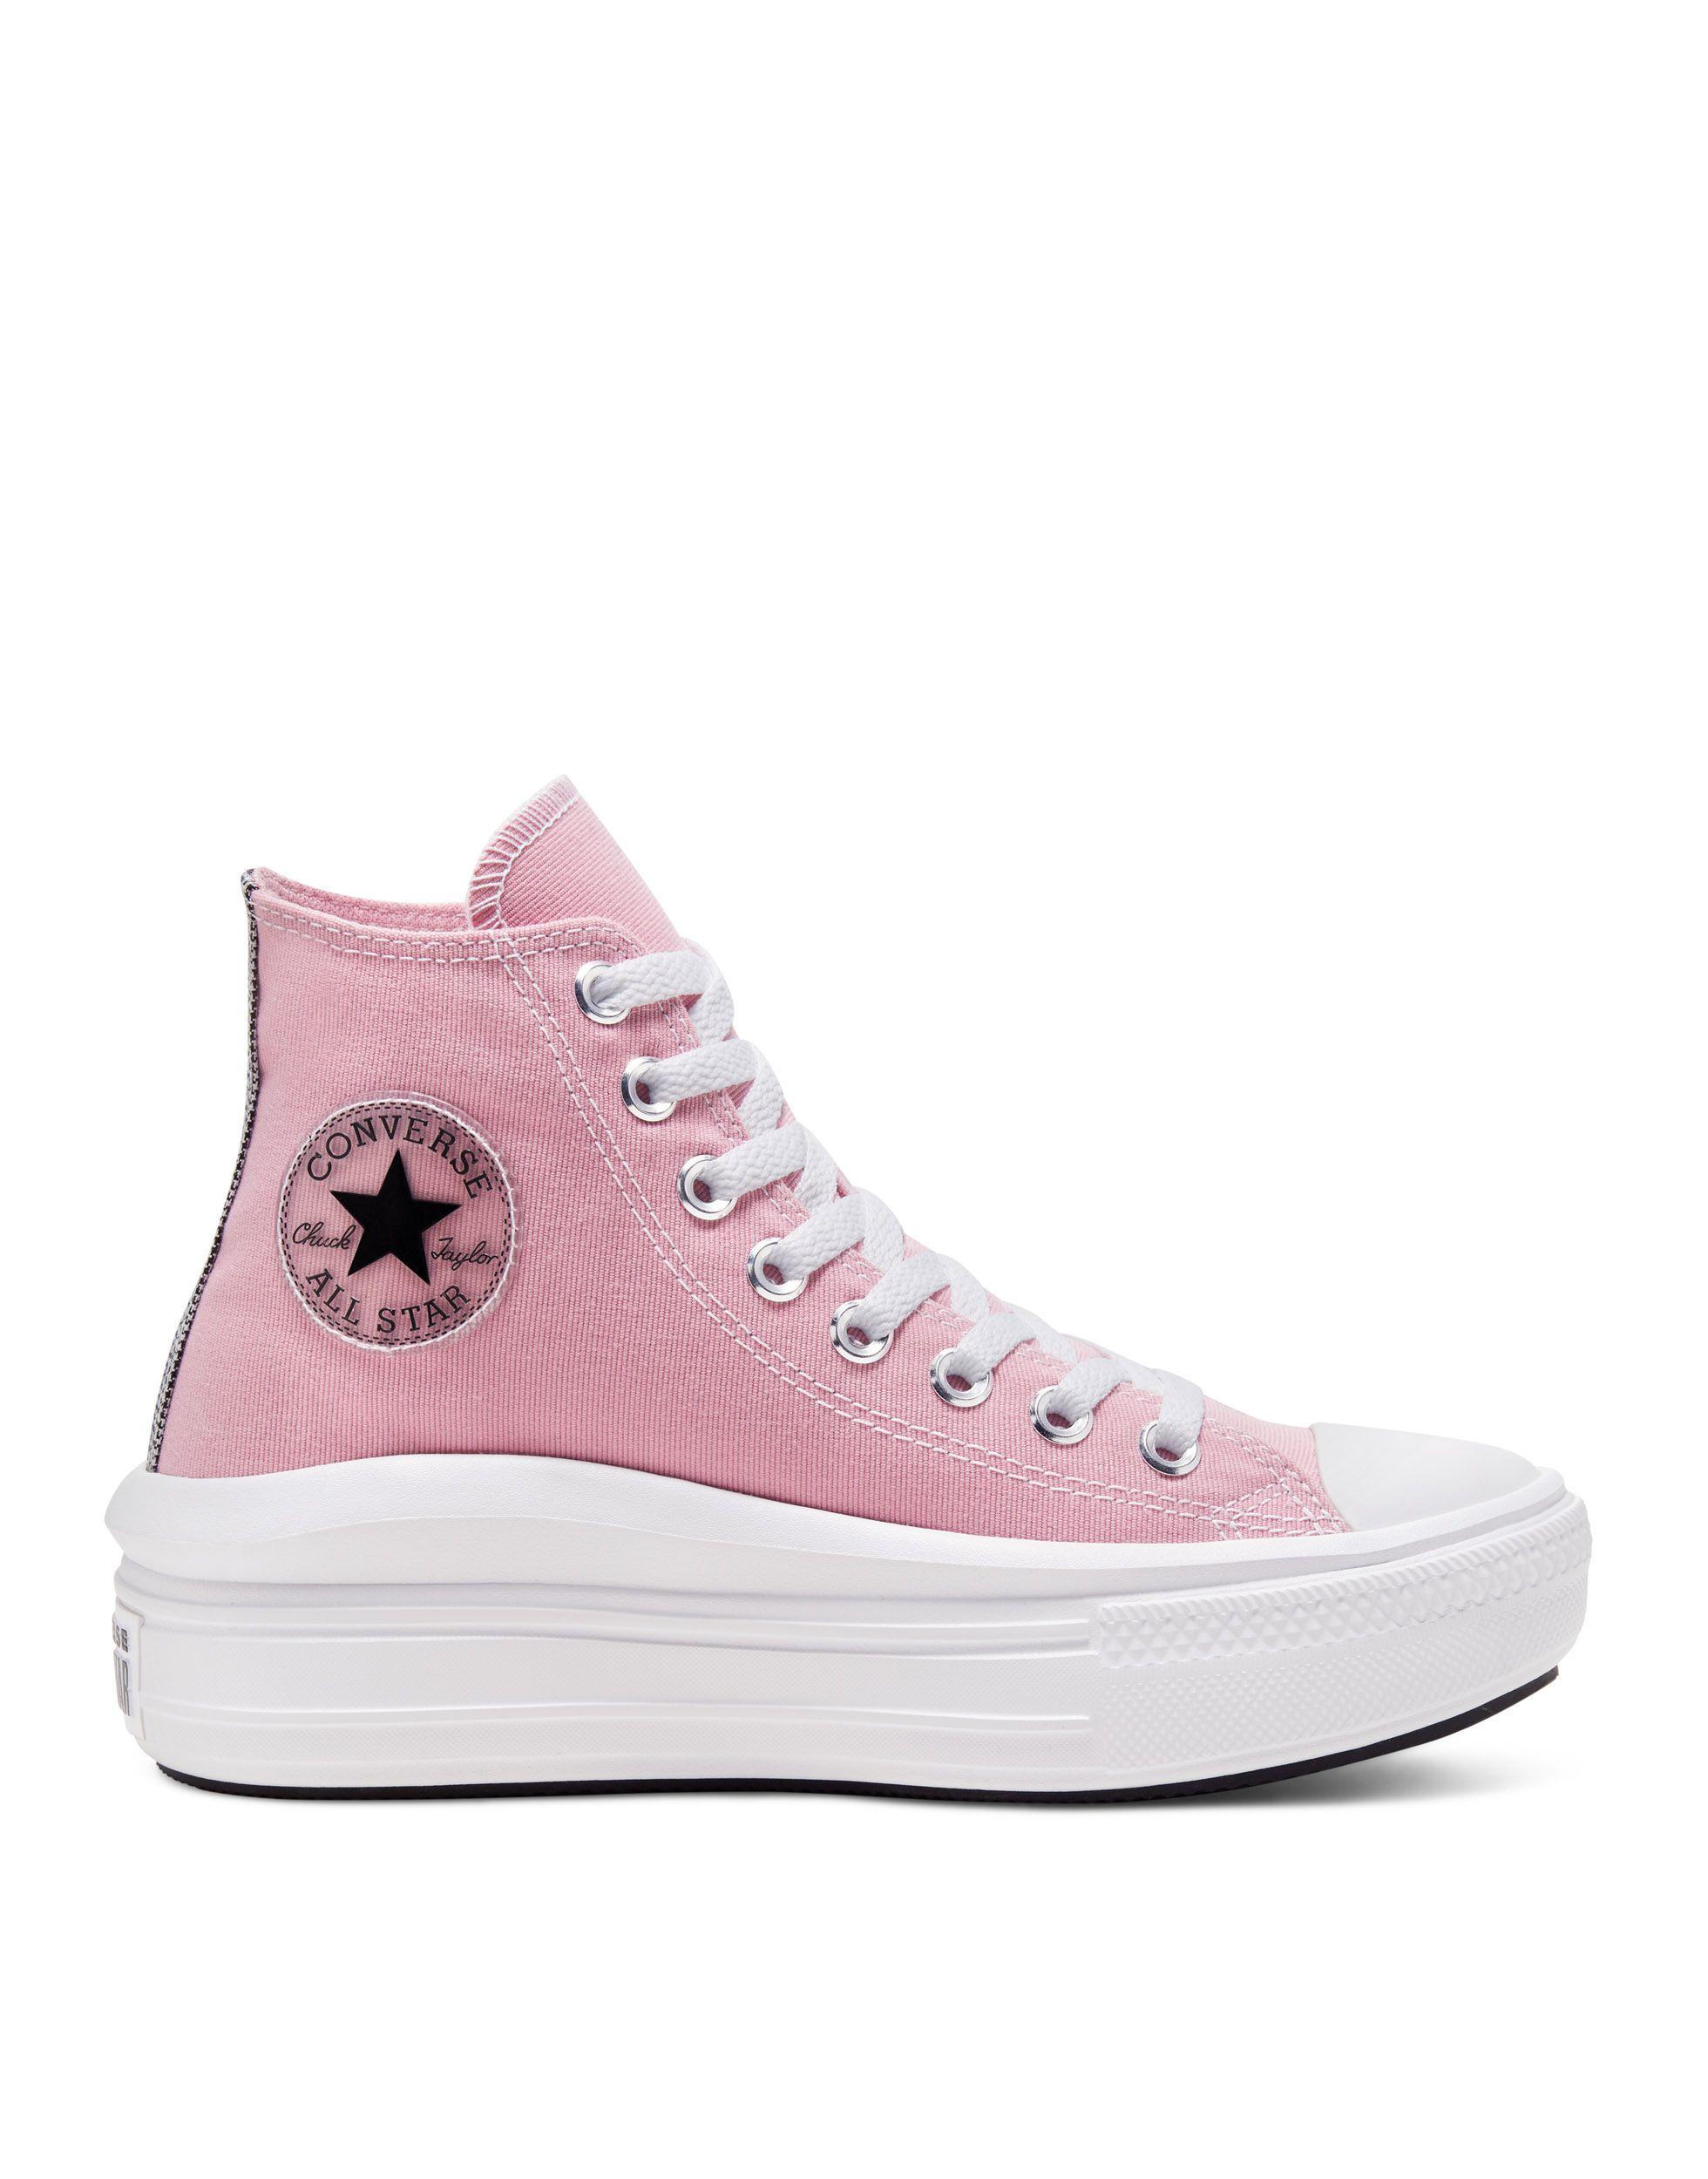 Converse Move Platform High-top Sneakers in Pink | Lyst